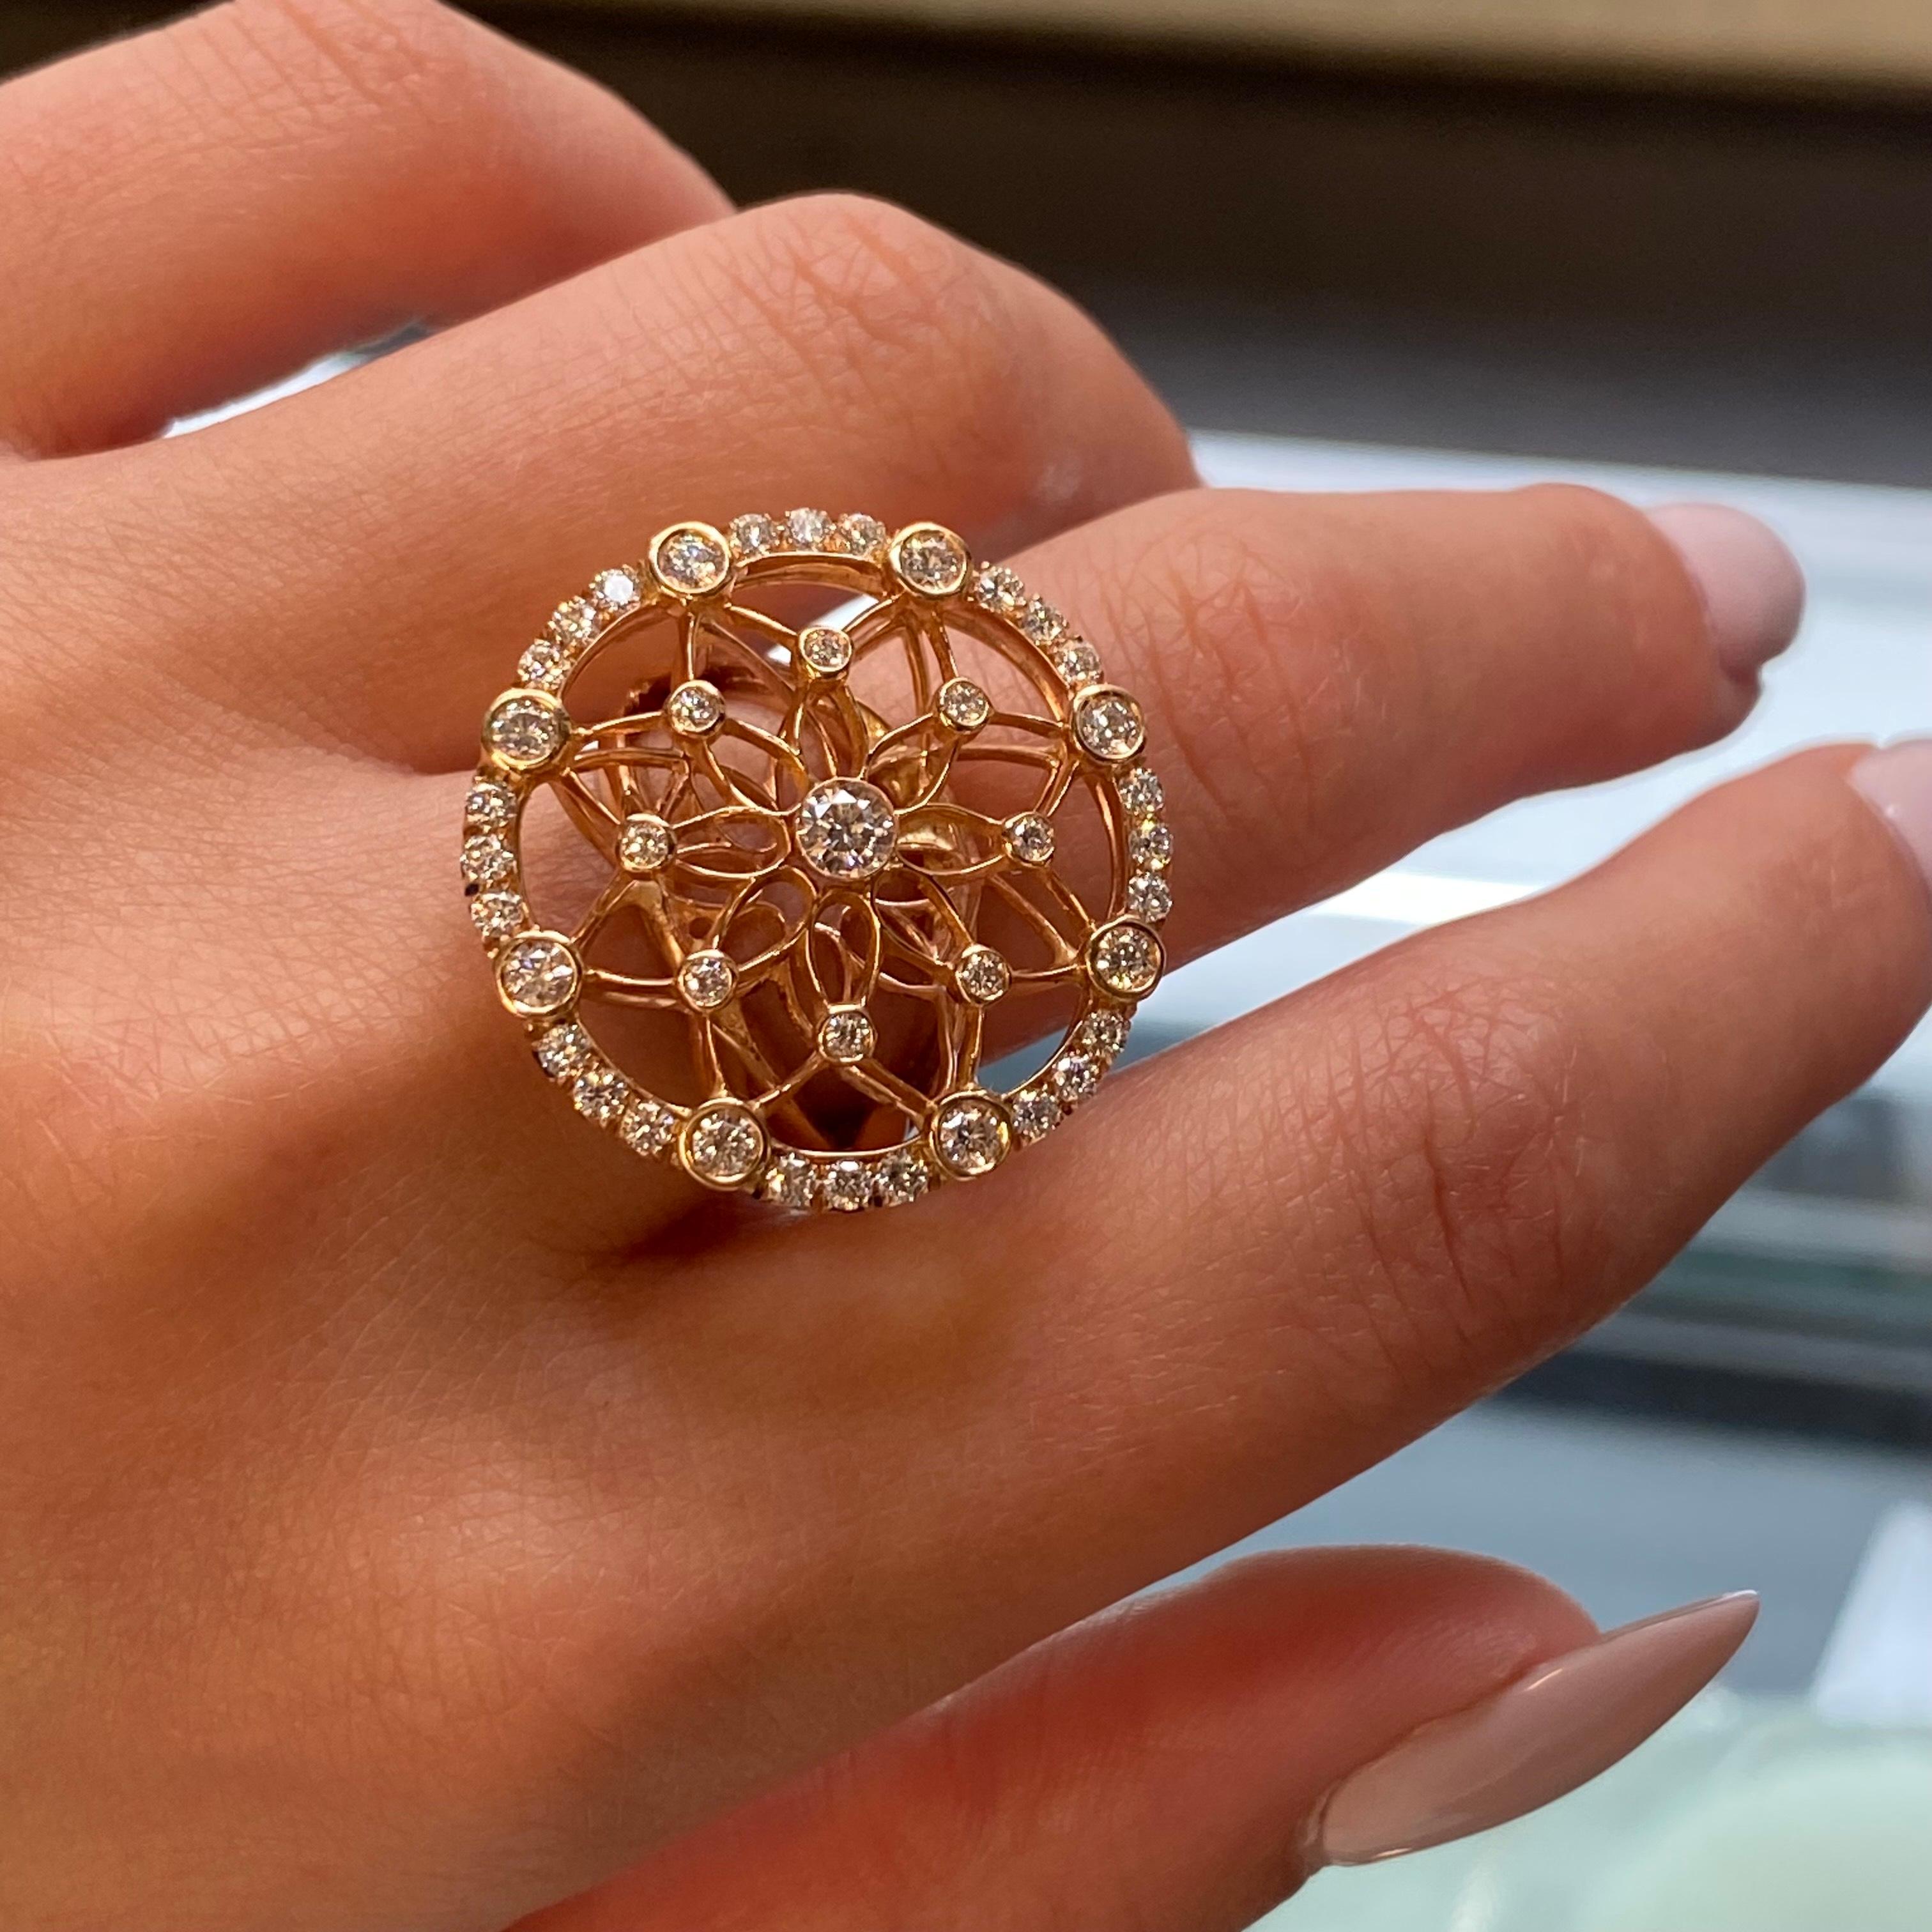 Luca Carati Diamond Large Cocktail Ring 18K Rose Gold 1.21Cttw Size 6.75 In New Condition For Sale In New York, NY